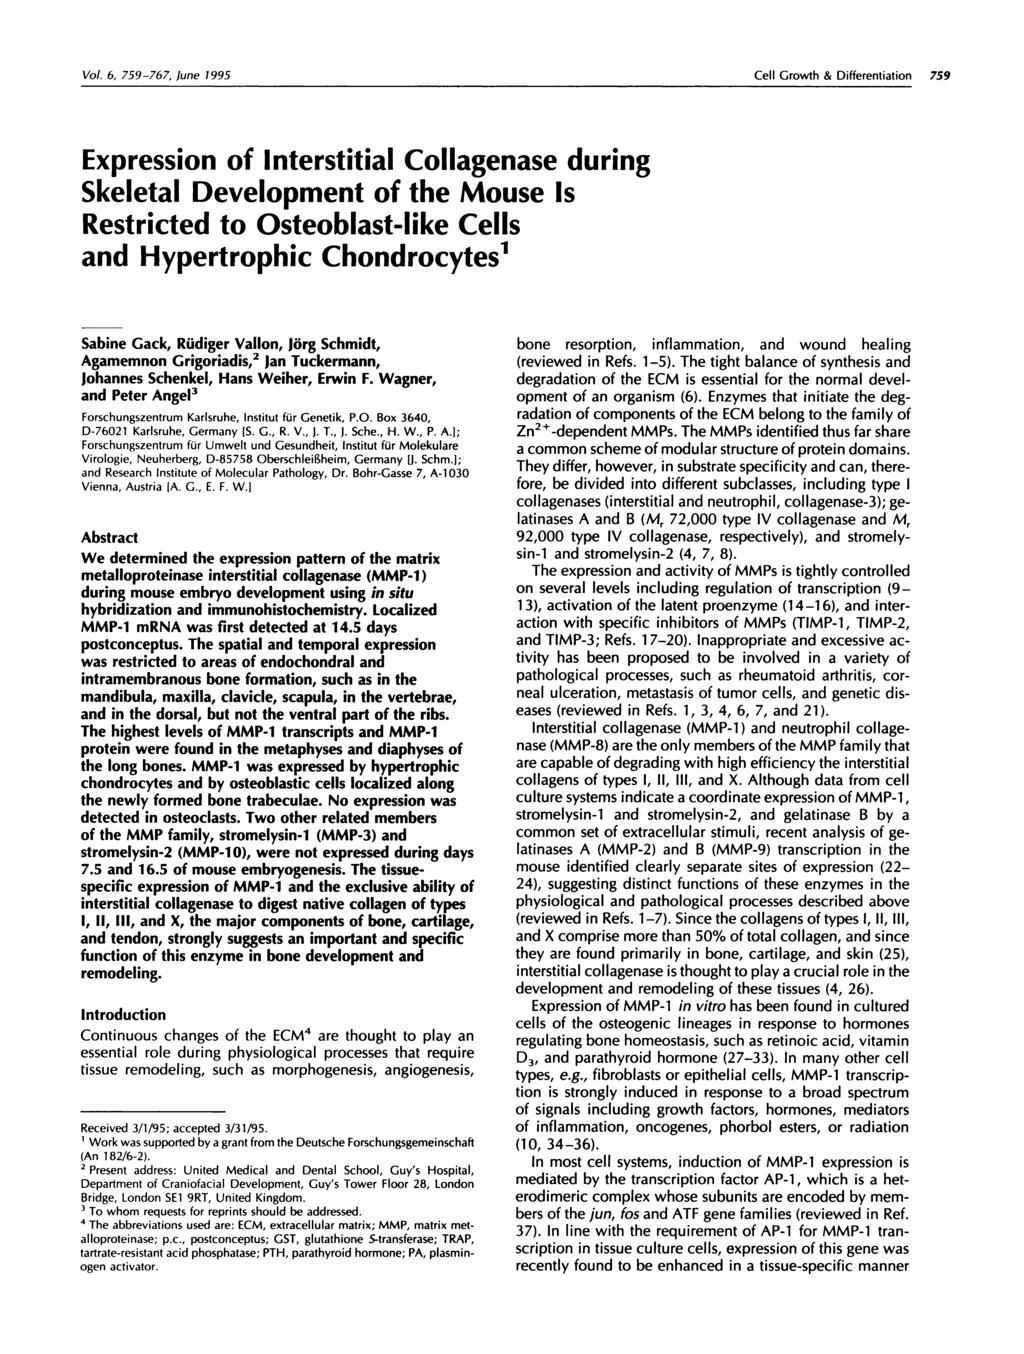 Vol. 6, 759-767, June 1995 Cell Growth & Differentiation 759 Expression of Interstitial Collagenase during Skeletal Development of the Mouse Is Restricted to Osteoblast-like Cells and Hypertrophic